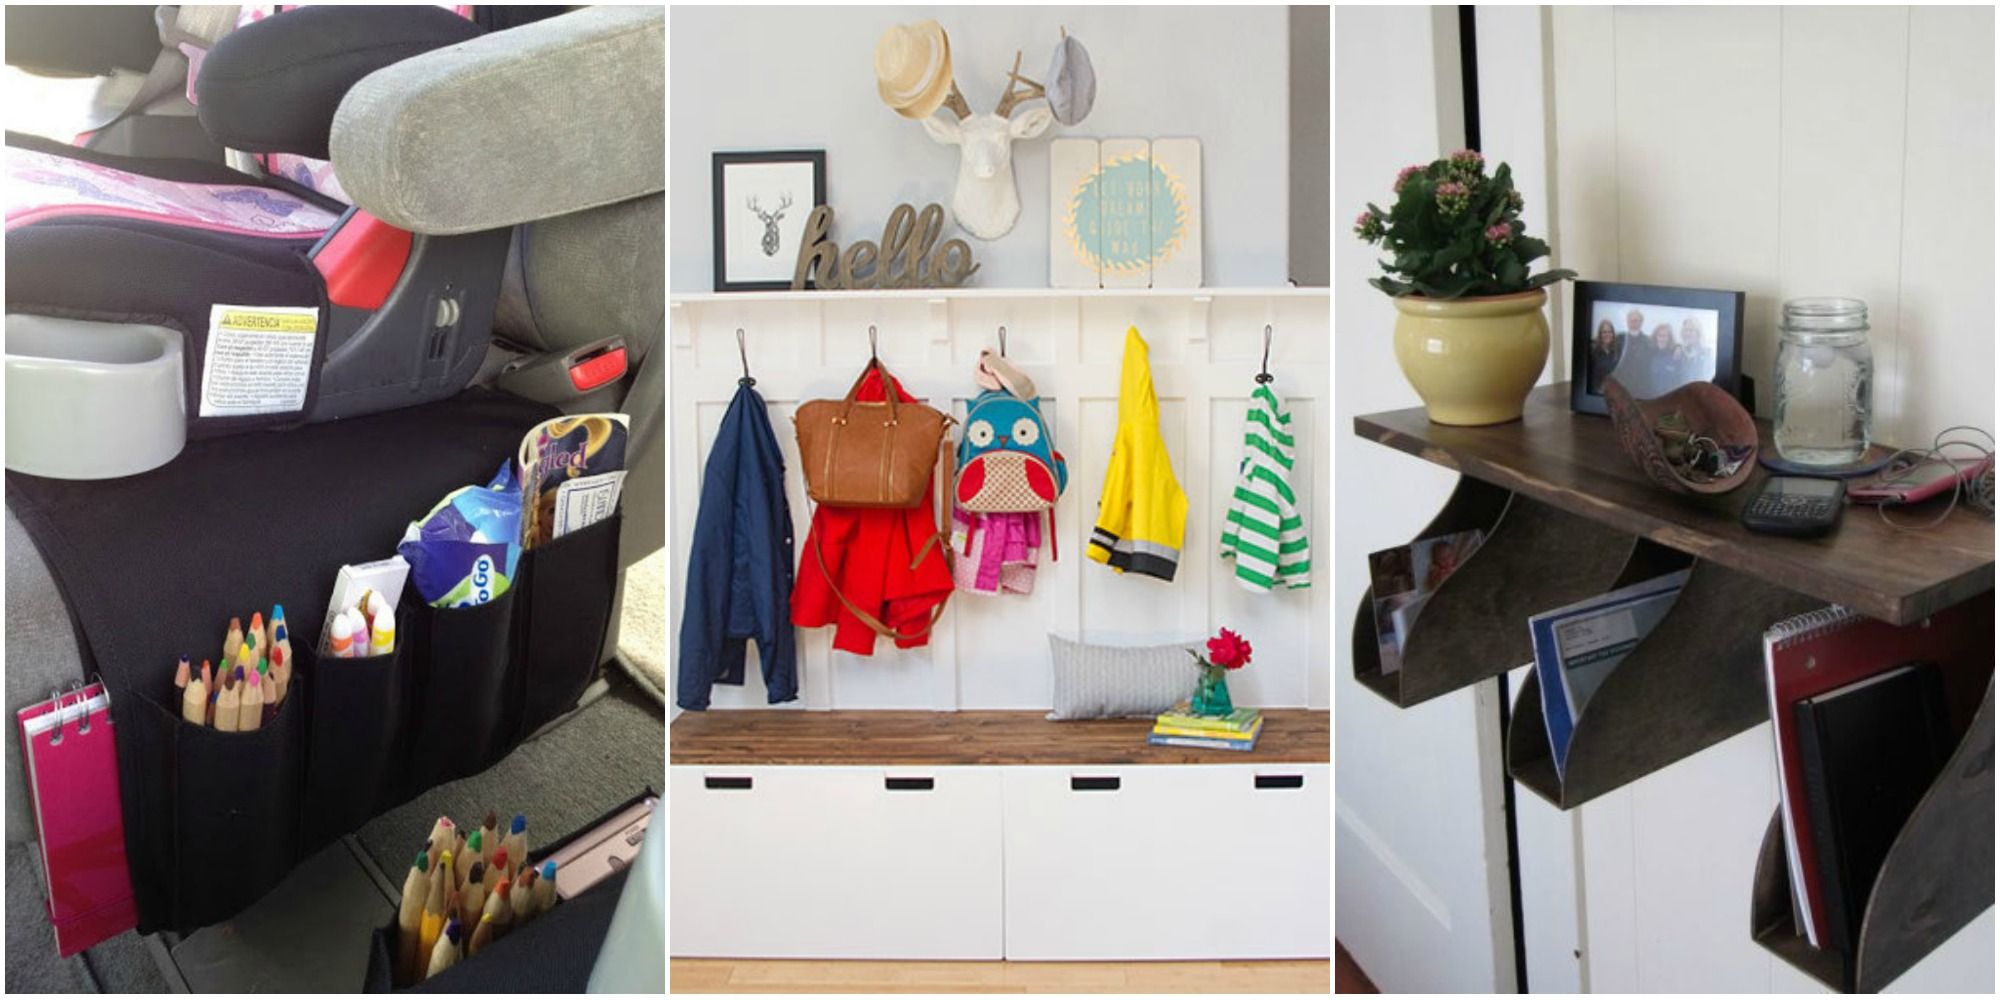 Stylish storage solutions for every part of your home - IKEA